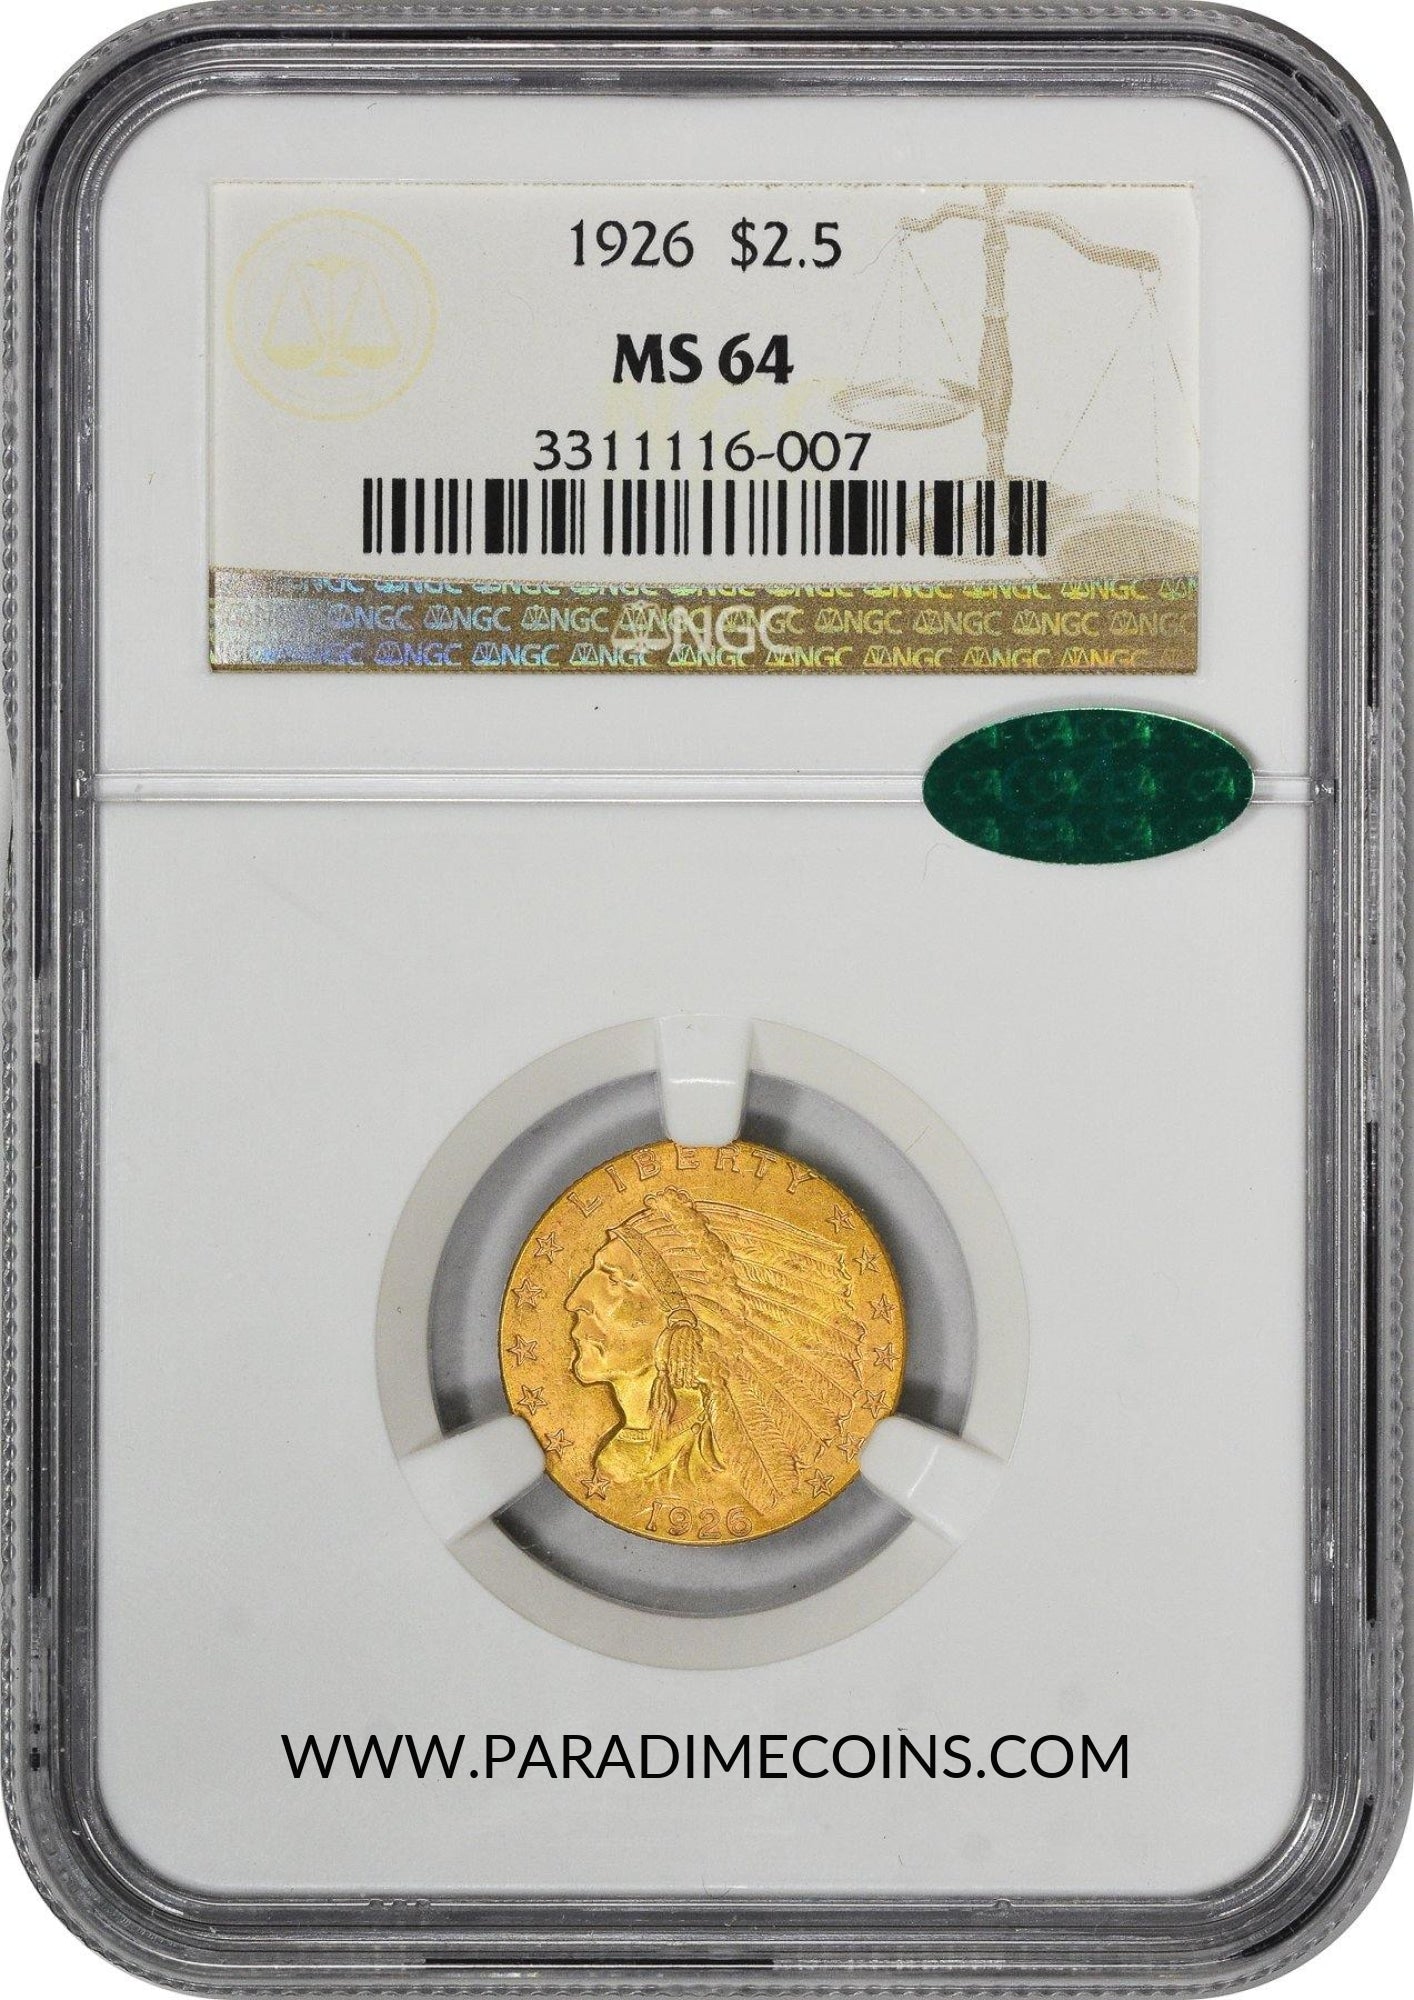 1926 $2.5 MS64 NGC CAC - Paradime Coins | PCGS NGC CACG CAC Rare US Numismatic Coins For Sale